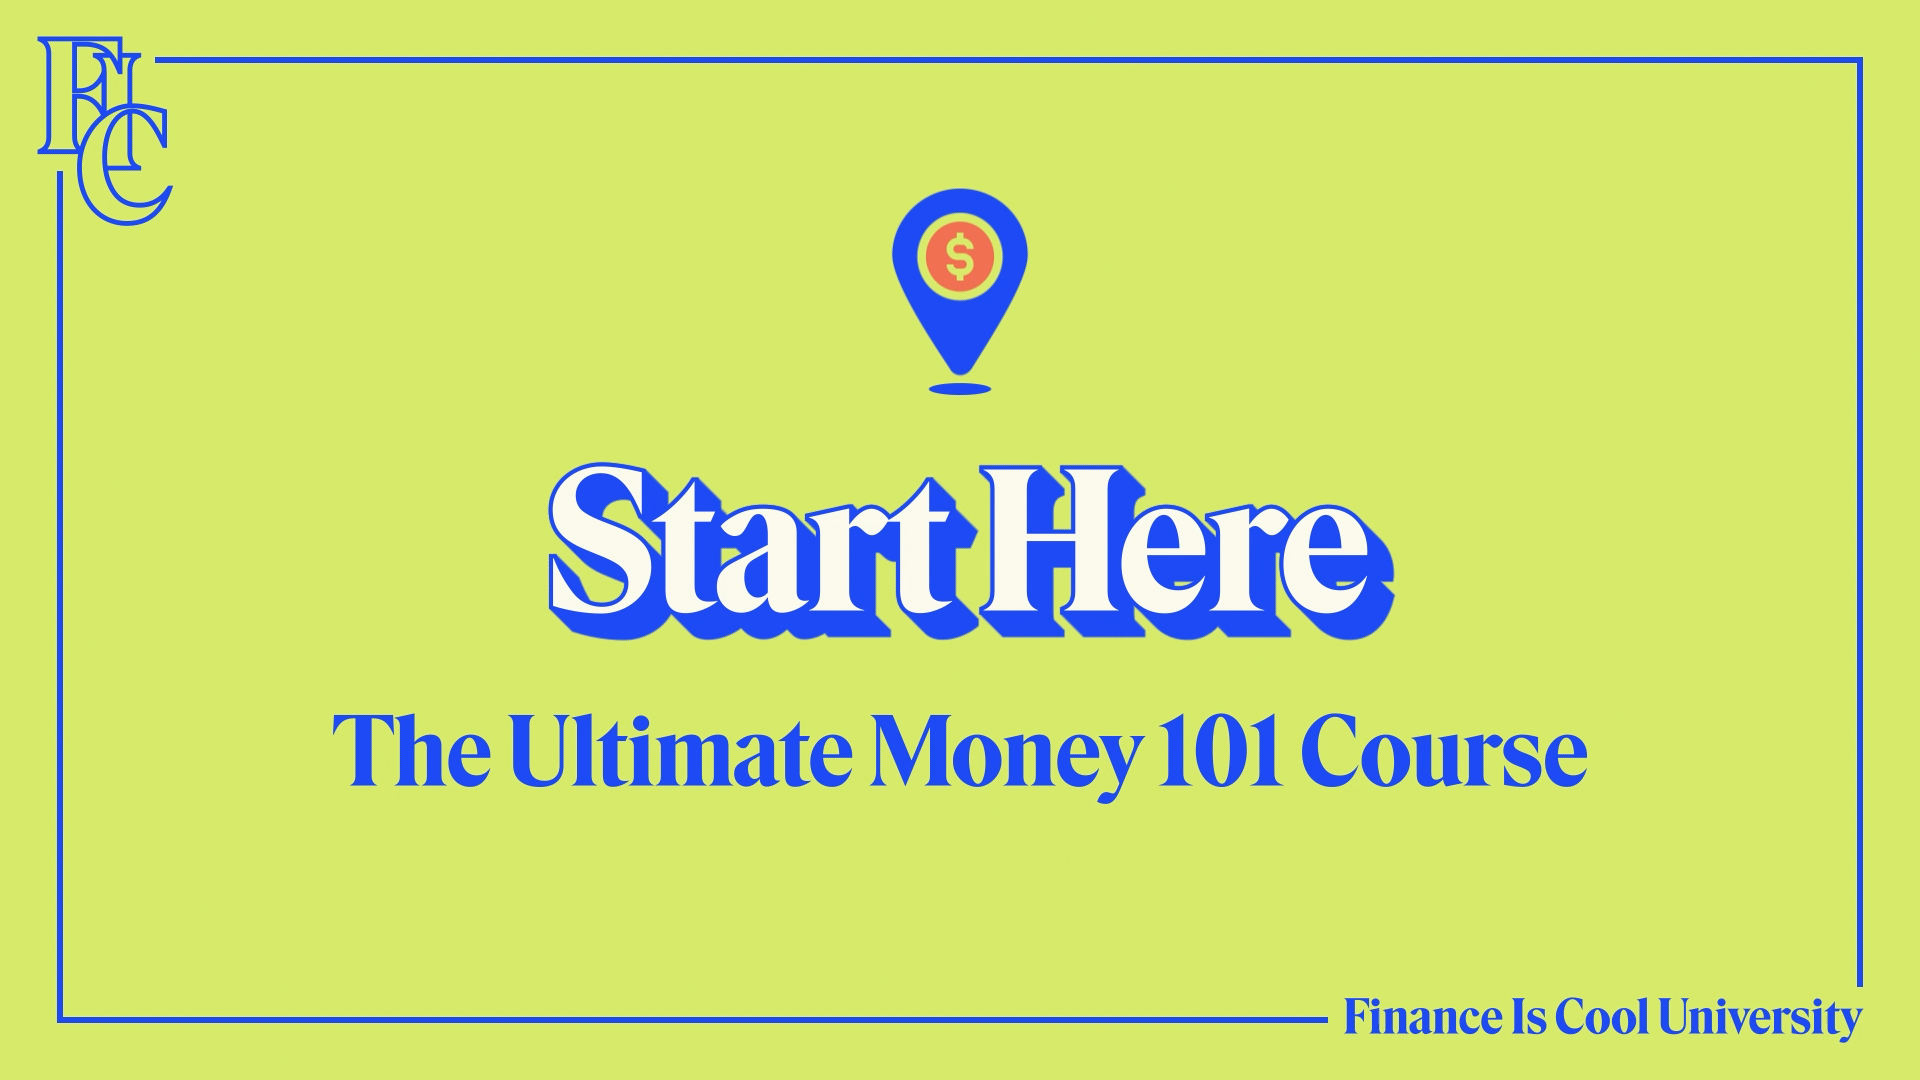 Start Here: The Ultimate Money 101 Course